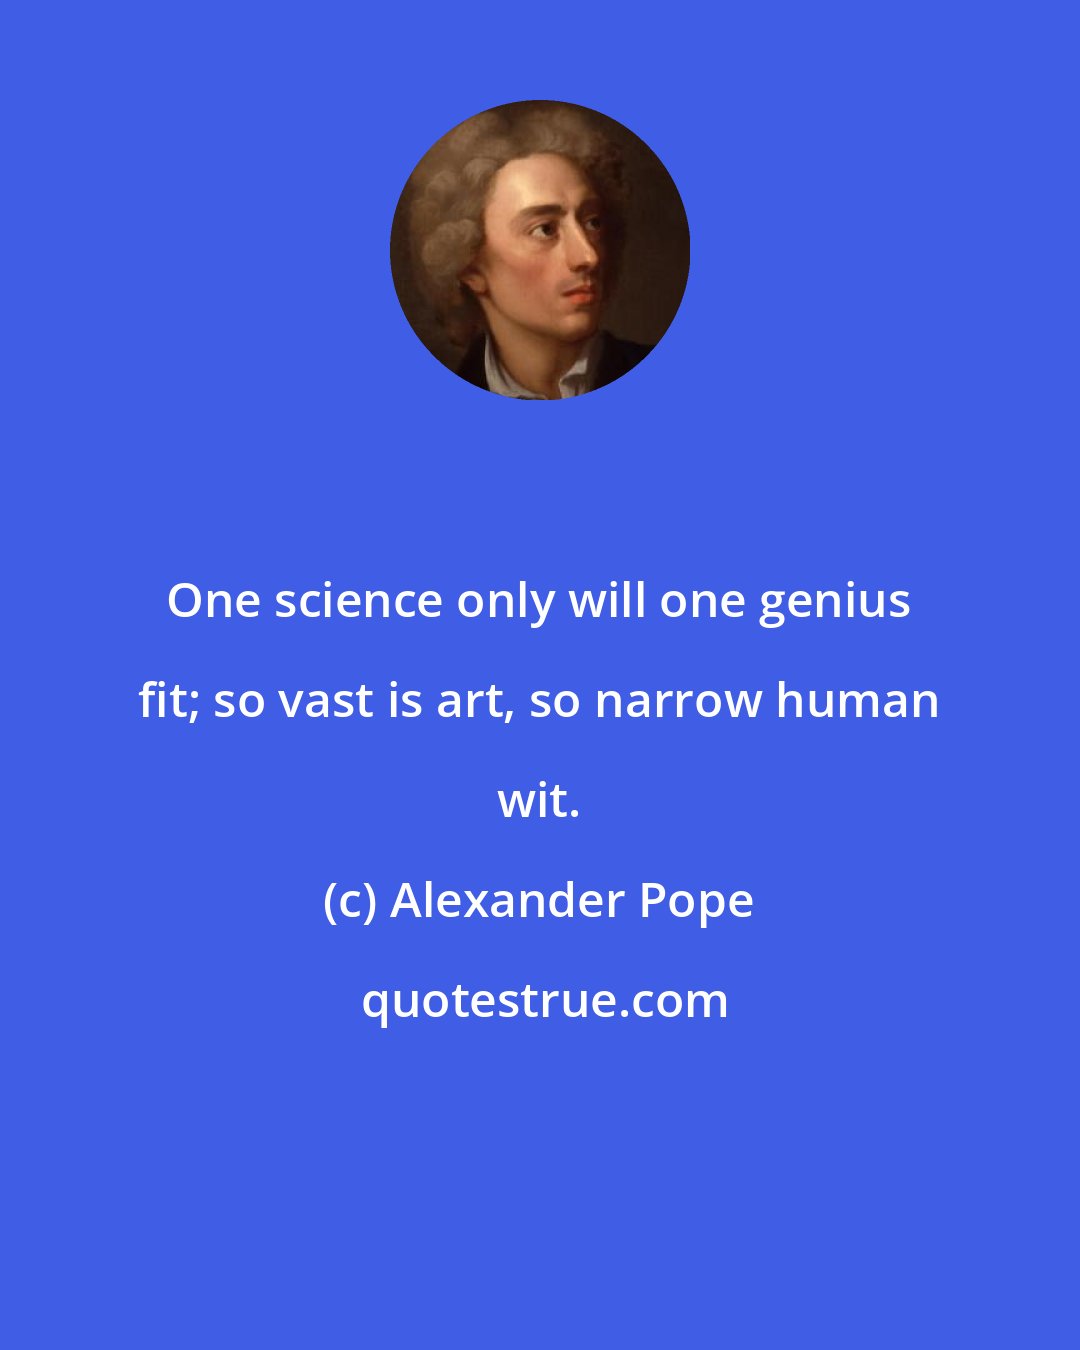 Alexander Pope: One science only will one genius fit; so vast is art, so narrow human wit.